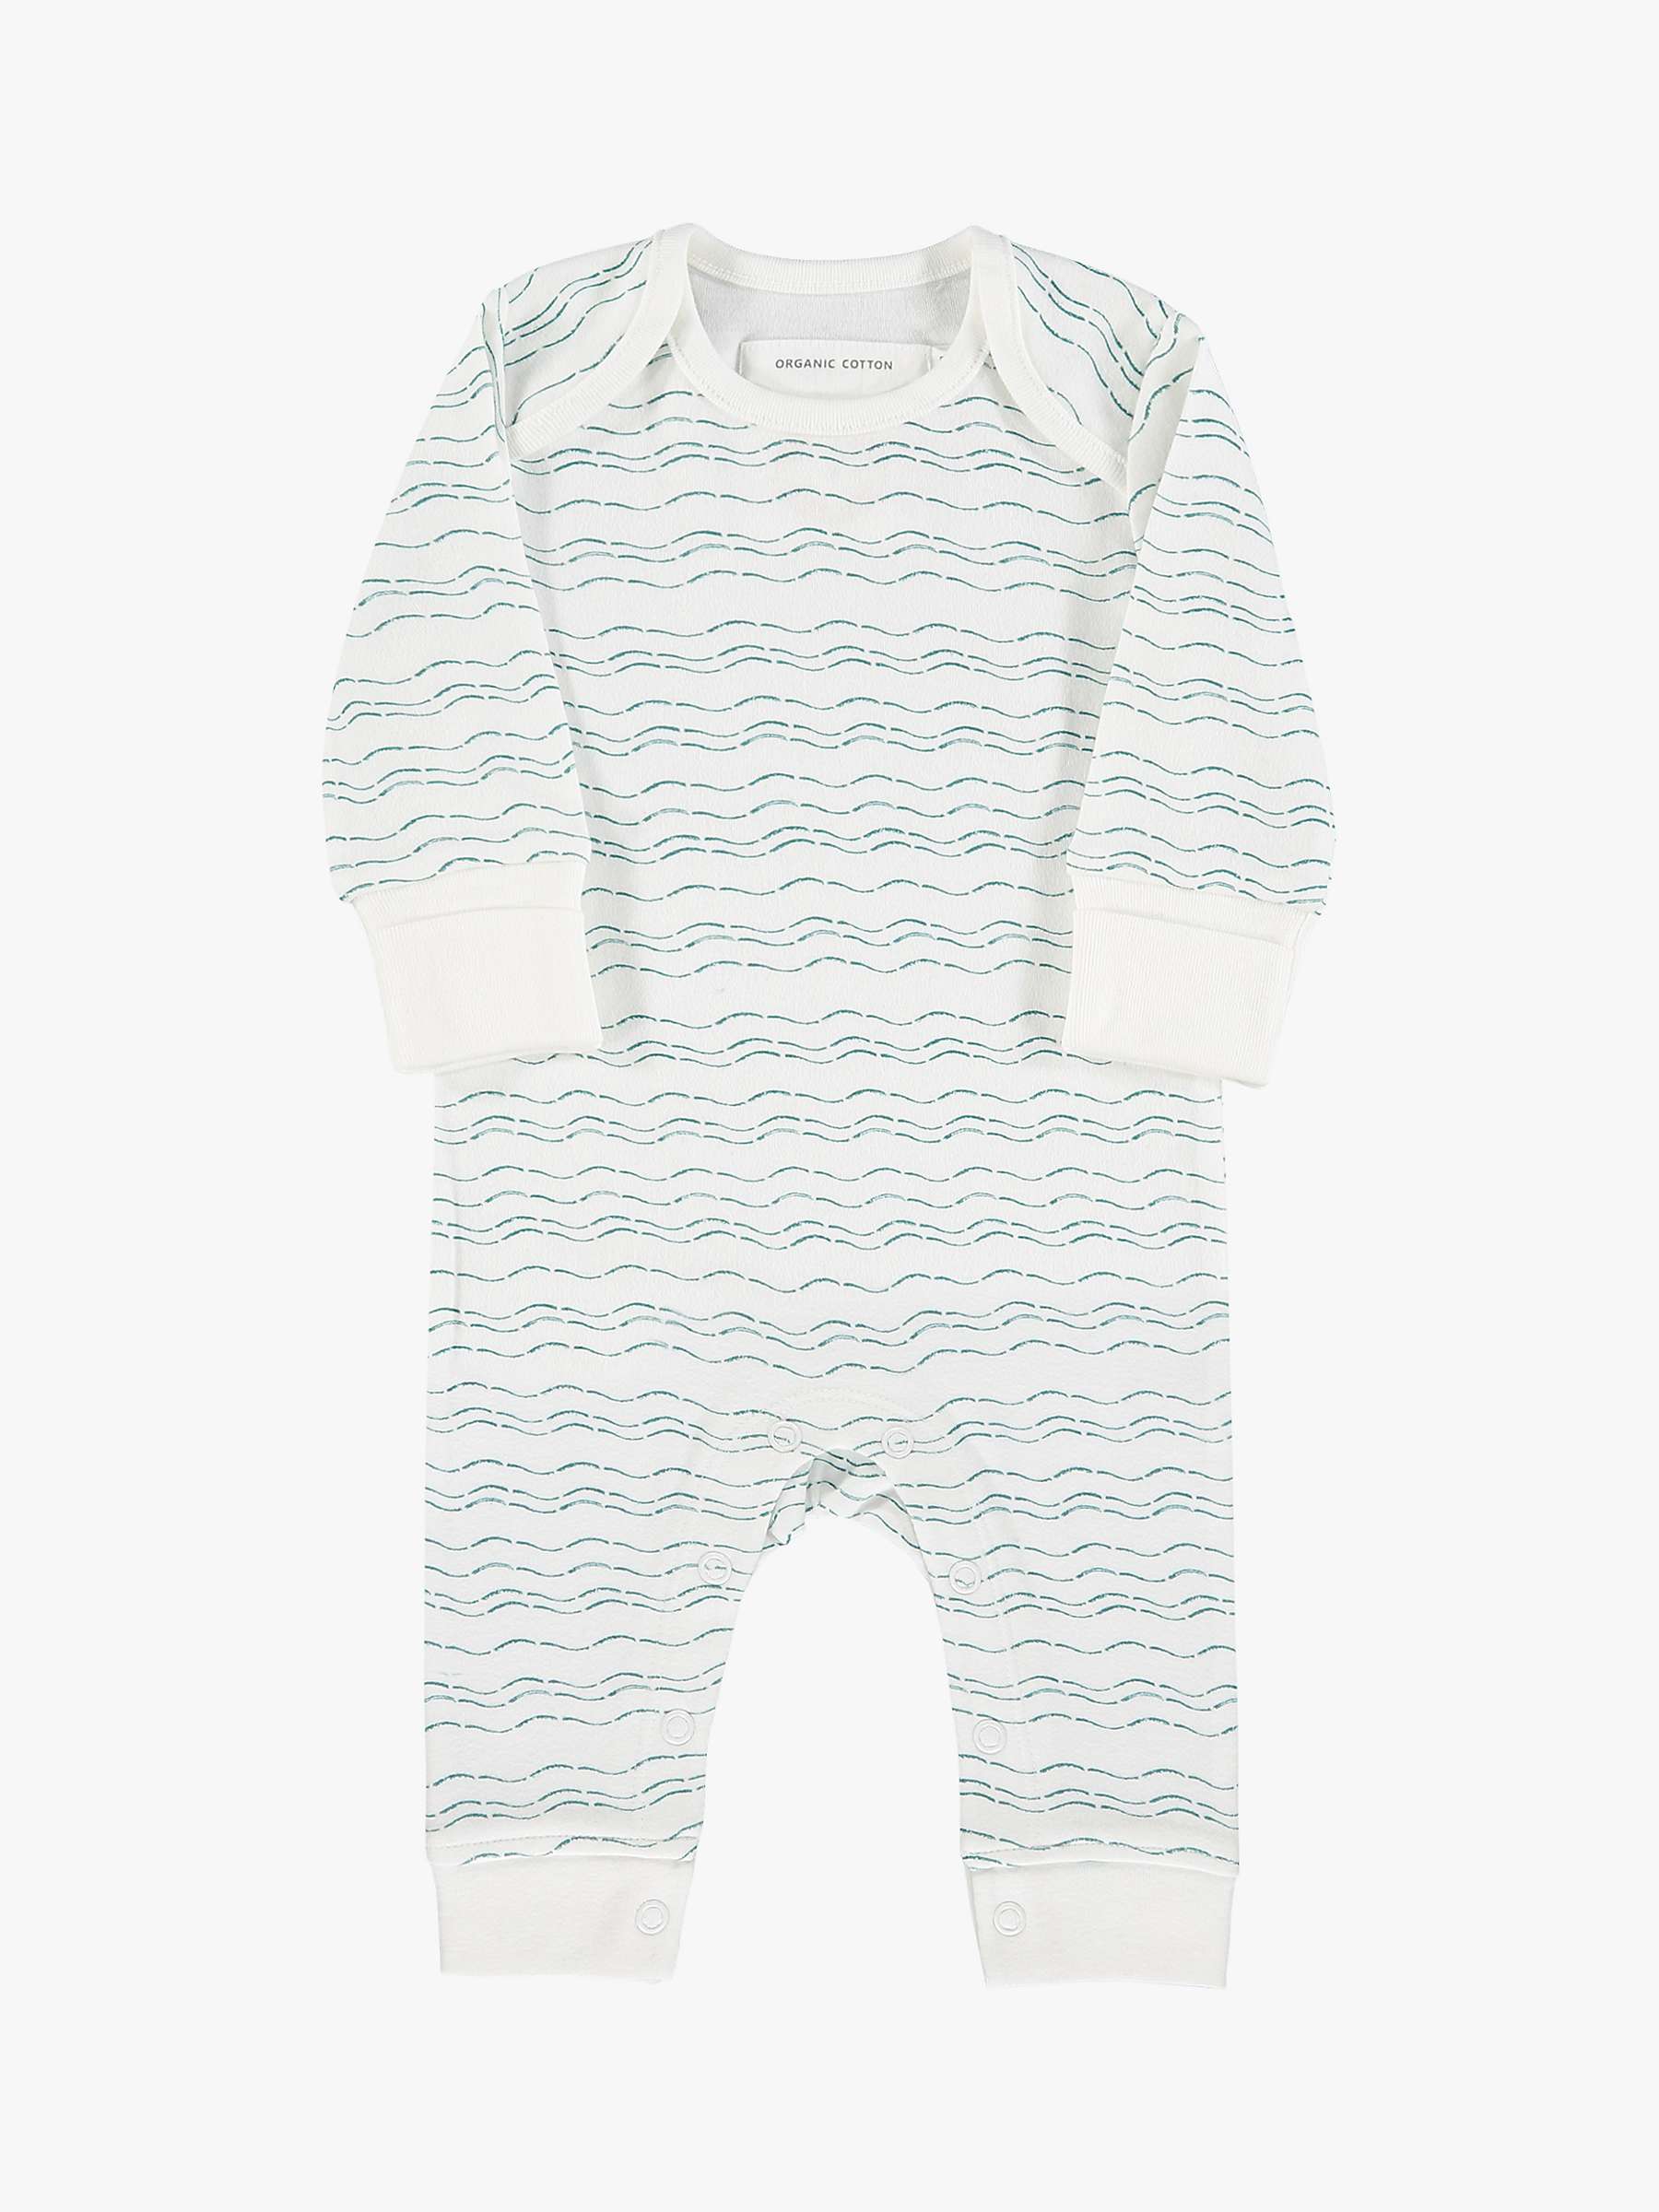 Buy From Babies with Love Waves of Joy Babygrow, Hat & Muslin Swaddling Wrap Gift Set Online at johnlewis.com